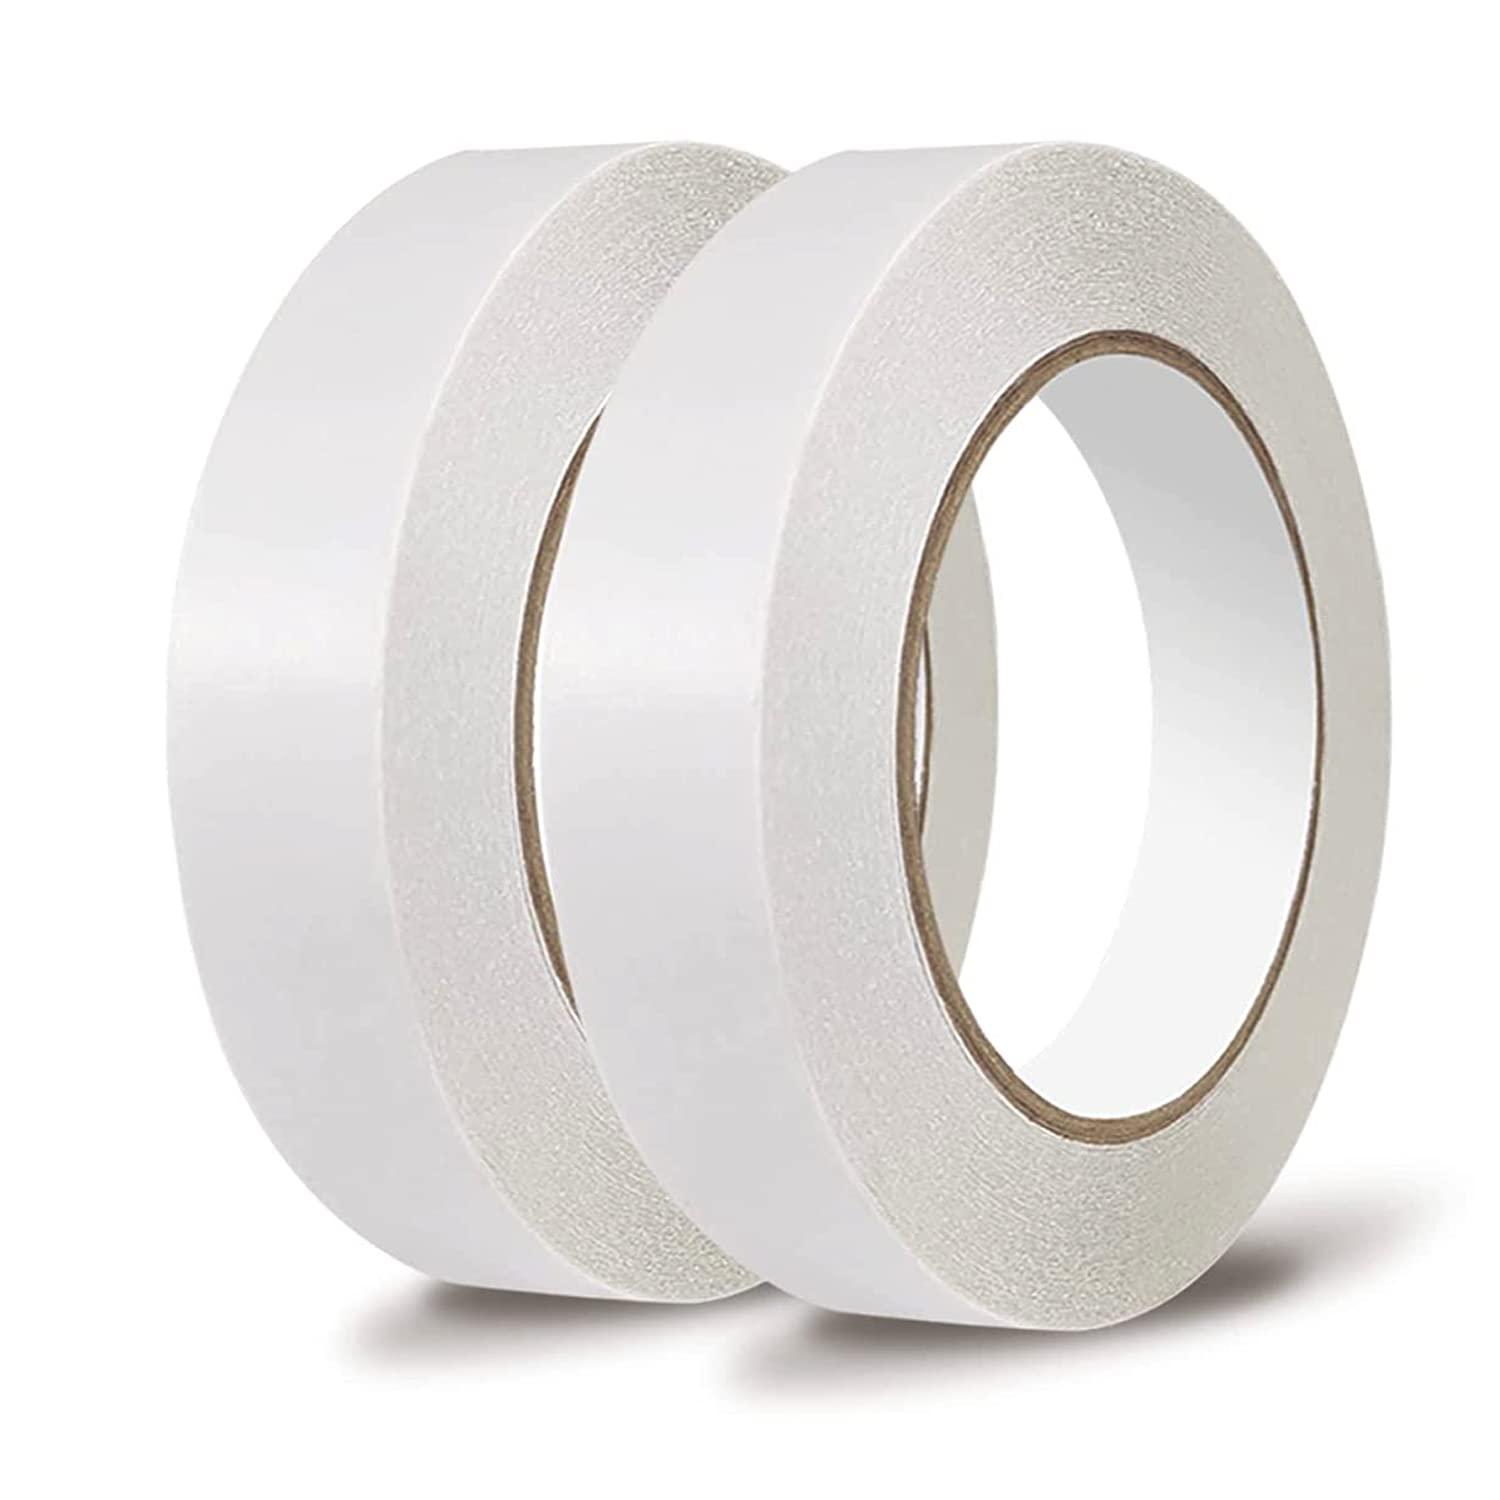 DGTANGYIN 1 2 rolls double sided adhesive sticky tape for arts, diy